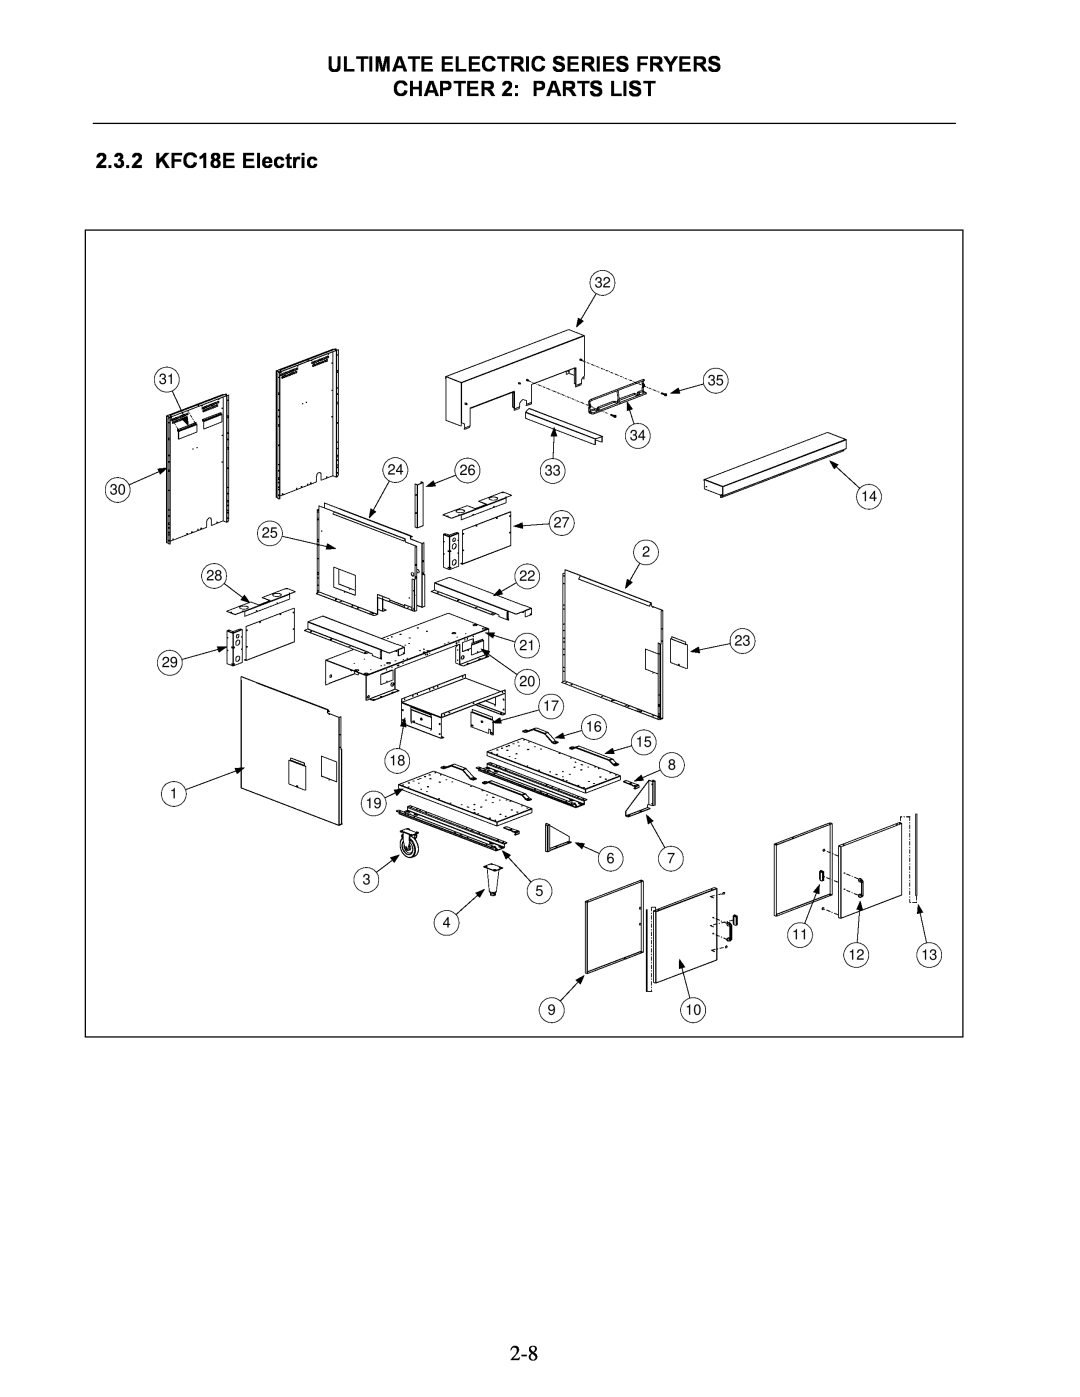 Frymaster manual 2.3.2, KFC18E Electric, Ultimate Electric Series Fryers, Parts List 